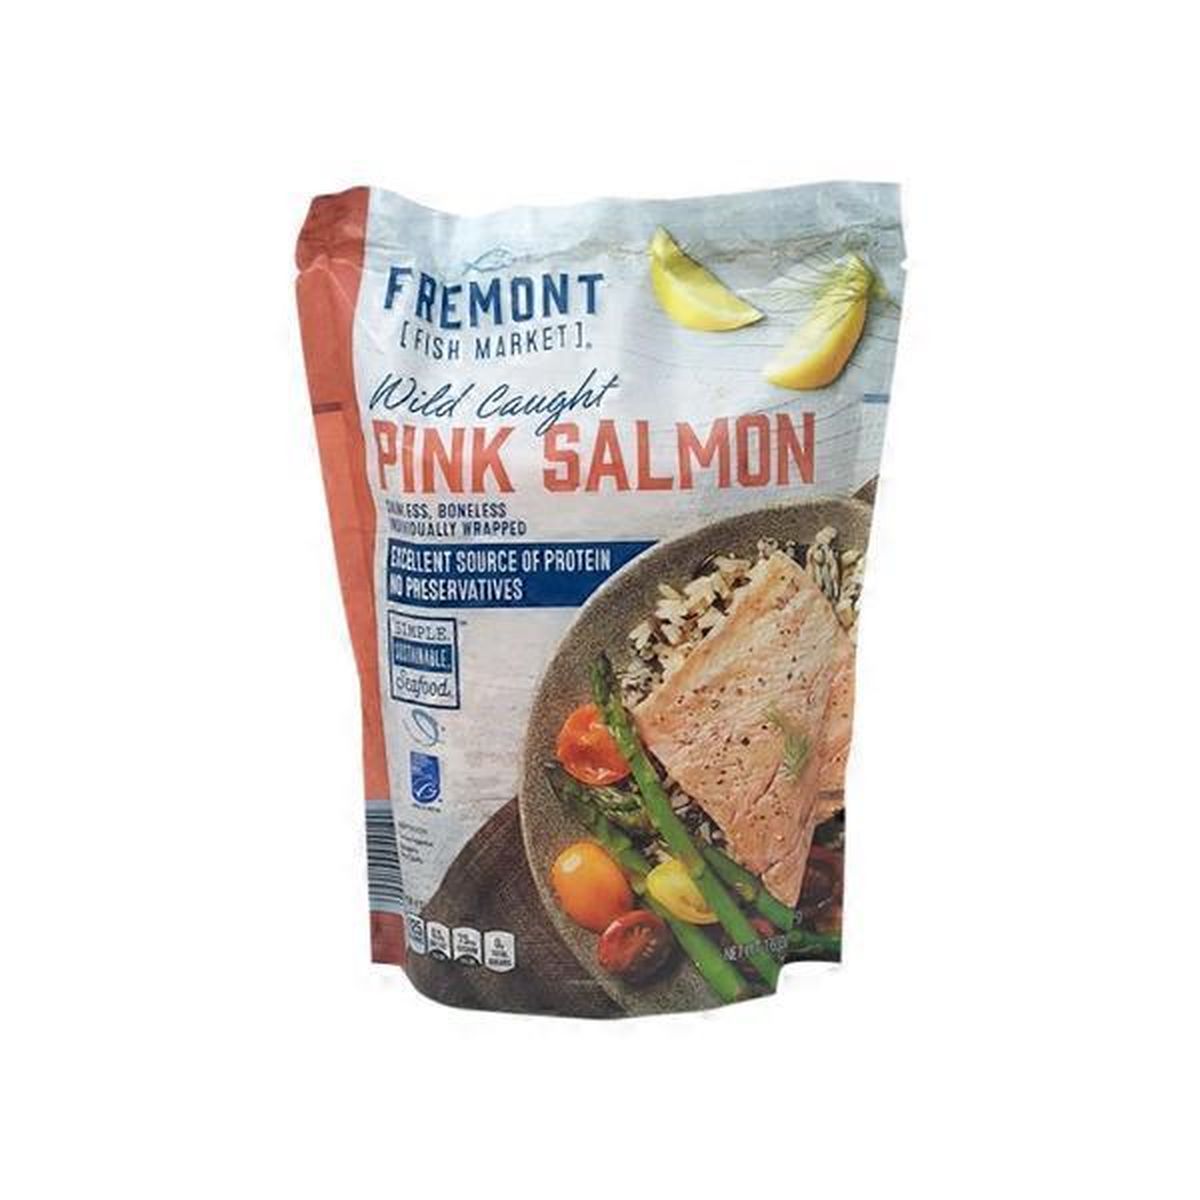 Fremont Fish Market Wild Caught Pink Salmon (16 oz) Delivery or